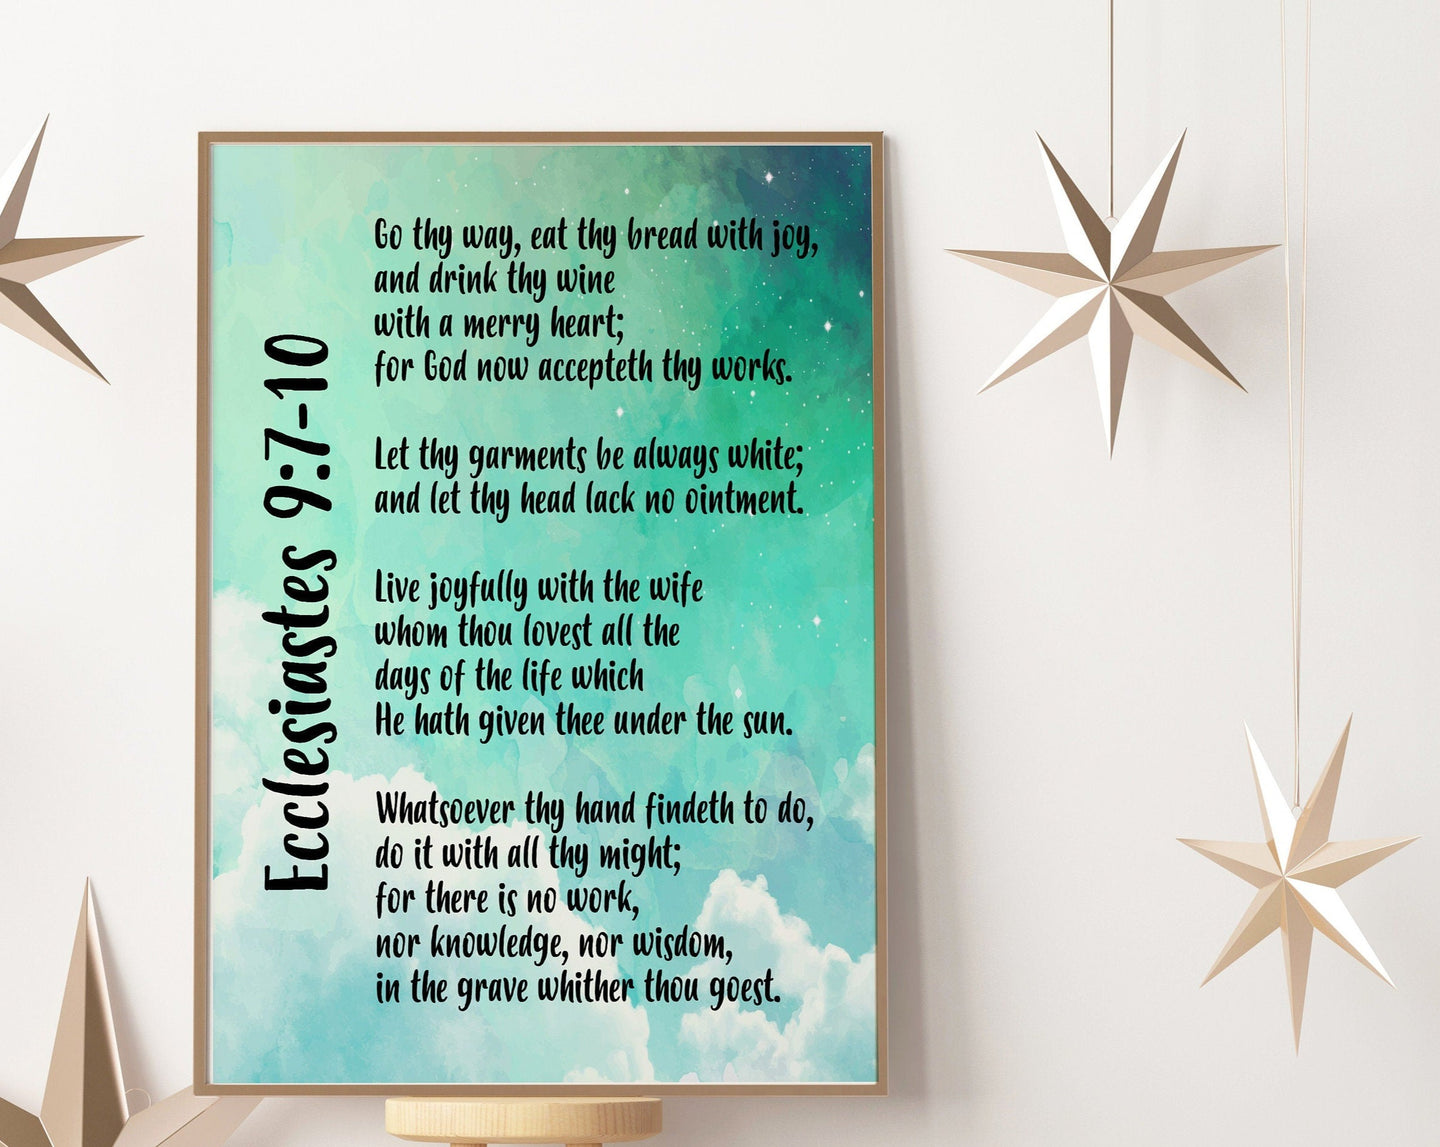 Ecclesiastes 9:7-10 Print - Bible verse - Go thy way, eat thy bread with joy - for Home, typography inspirational scripture print UNFRAMED